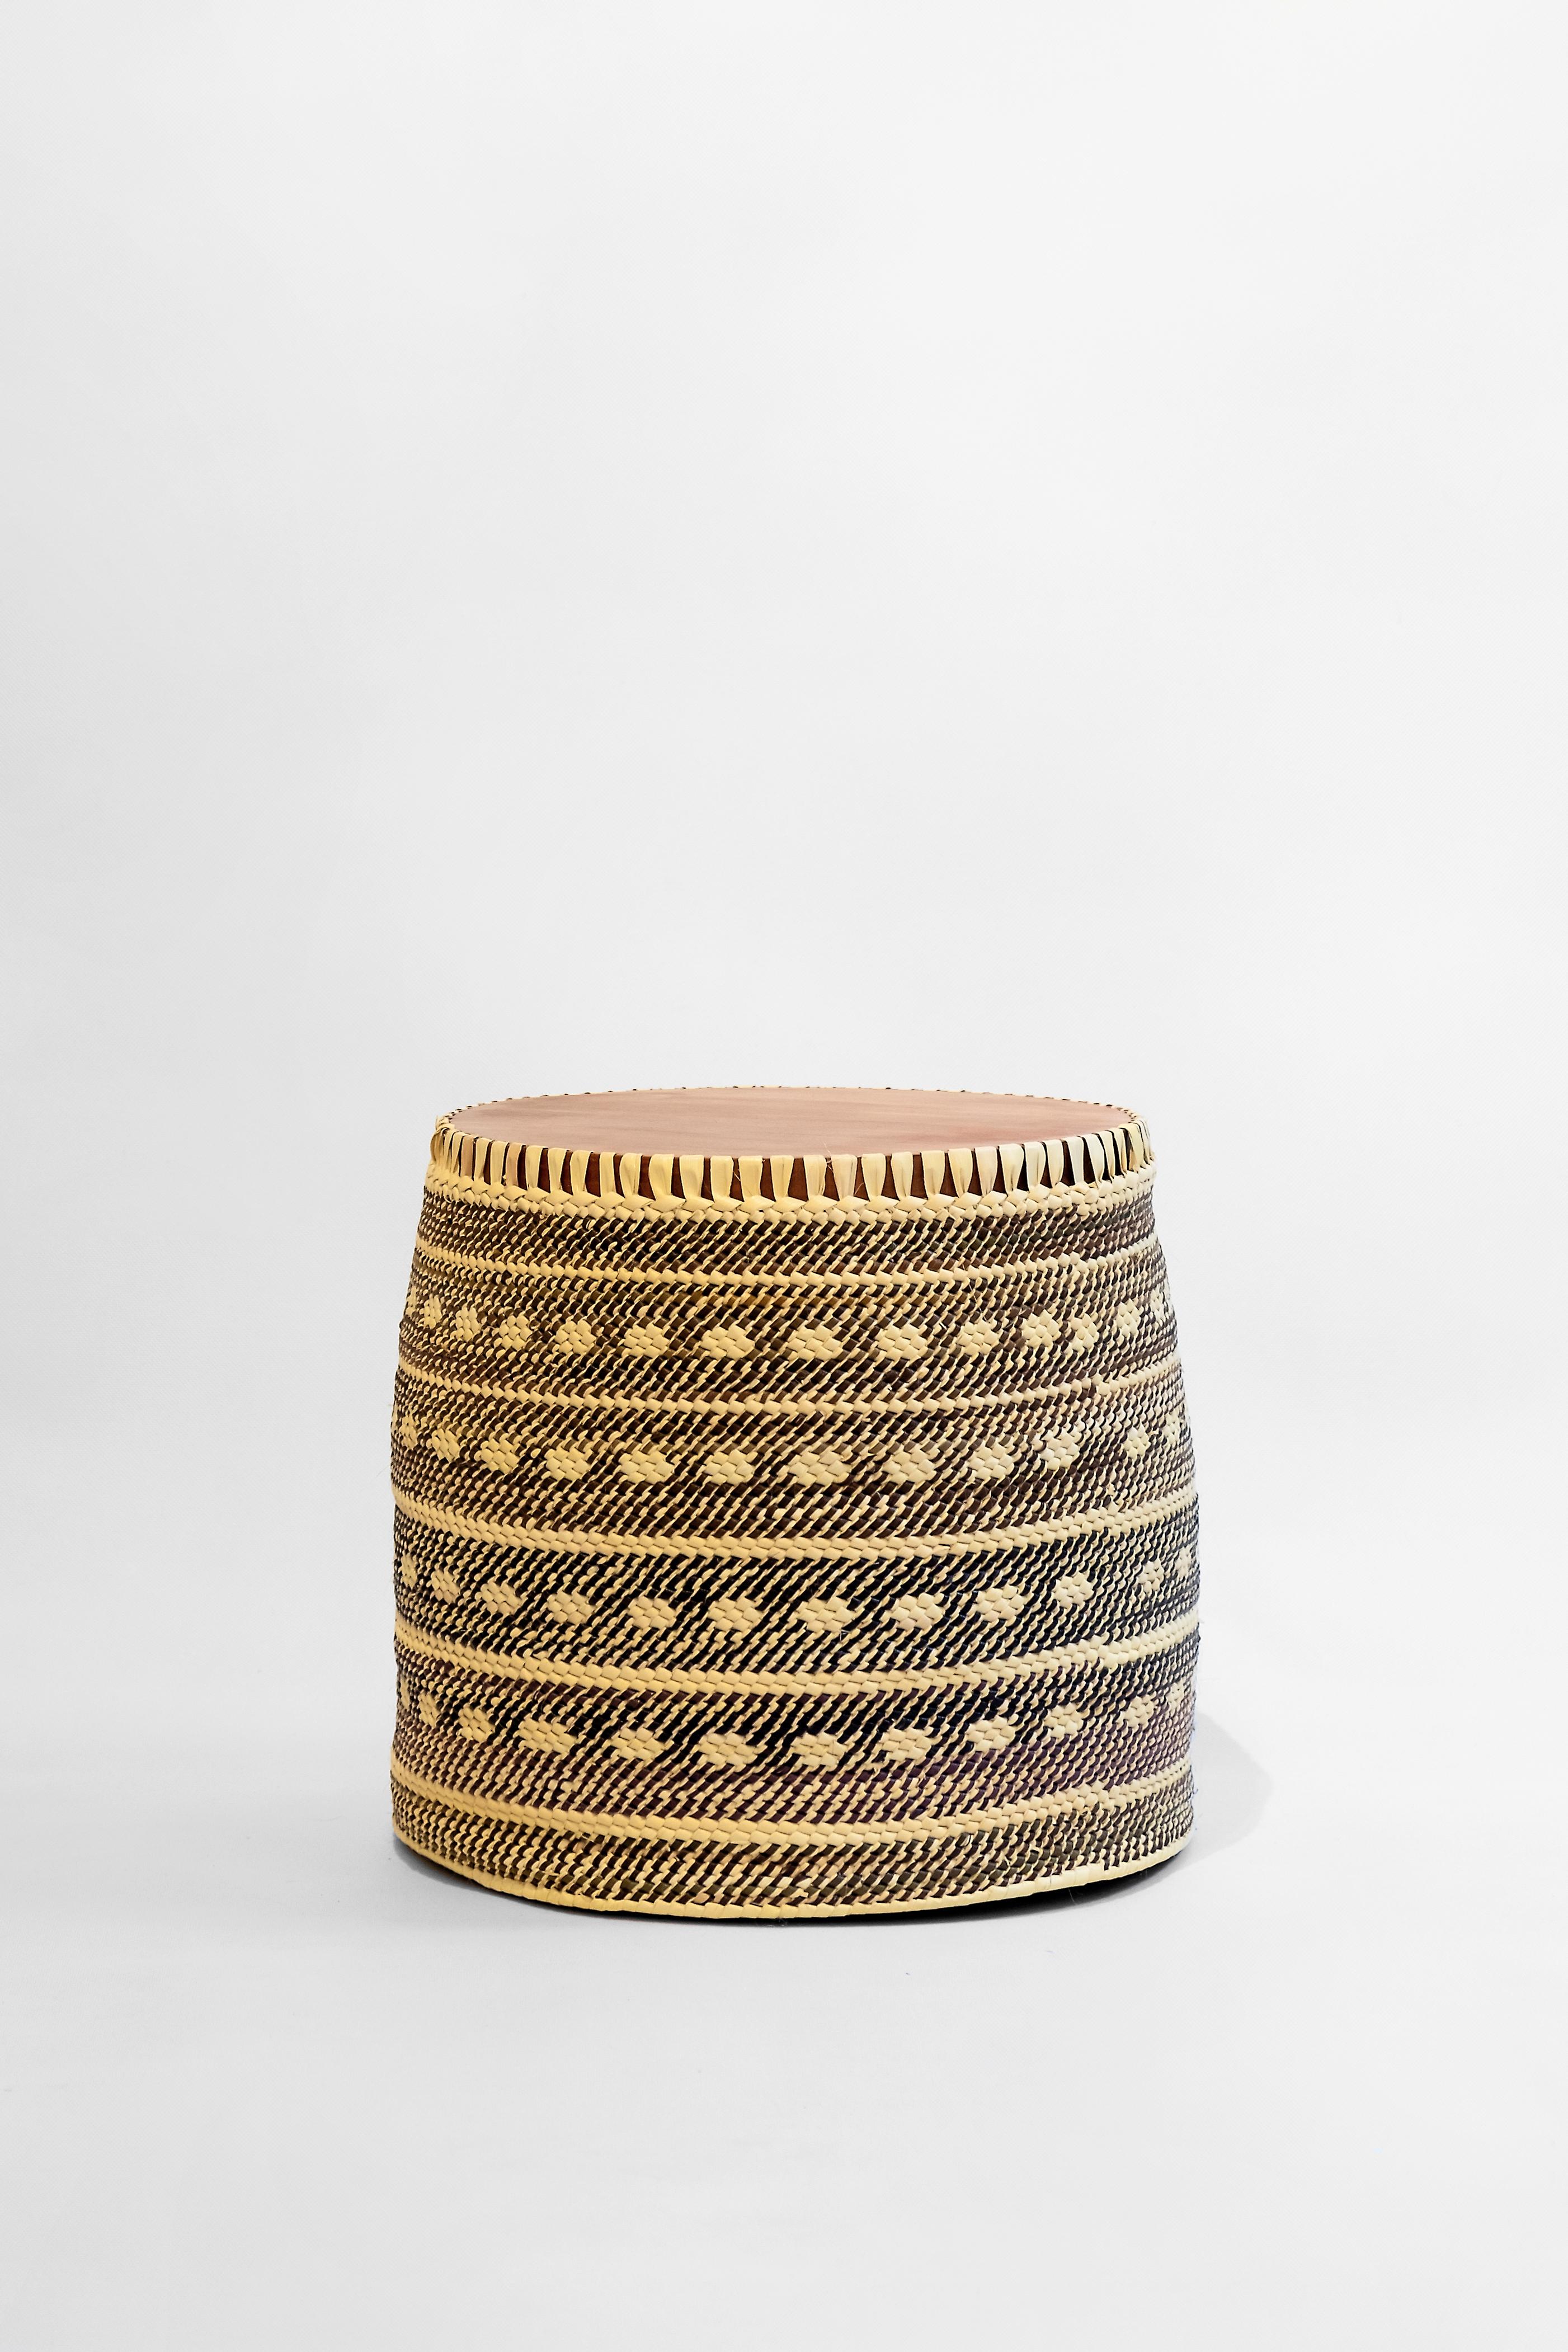 Palafitas side table S: handcrafted in Brazil with tucumã straw and solid wood In New Condition For Sale In Jundiaí, SP